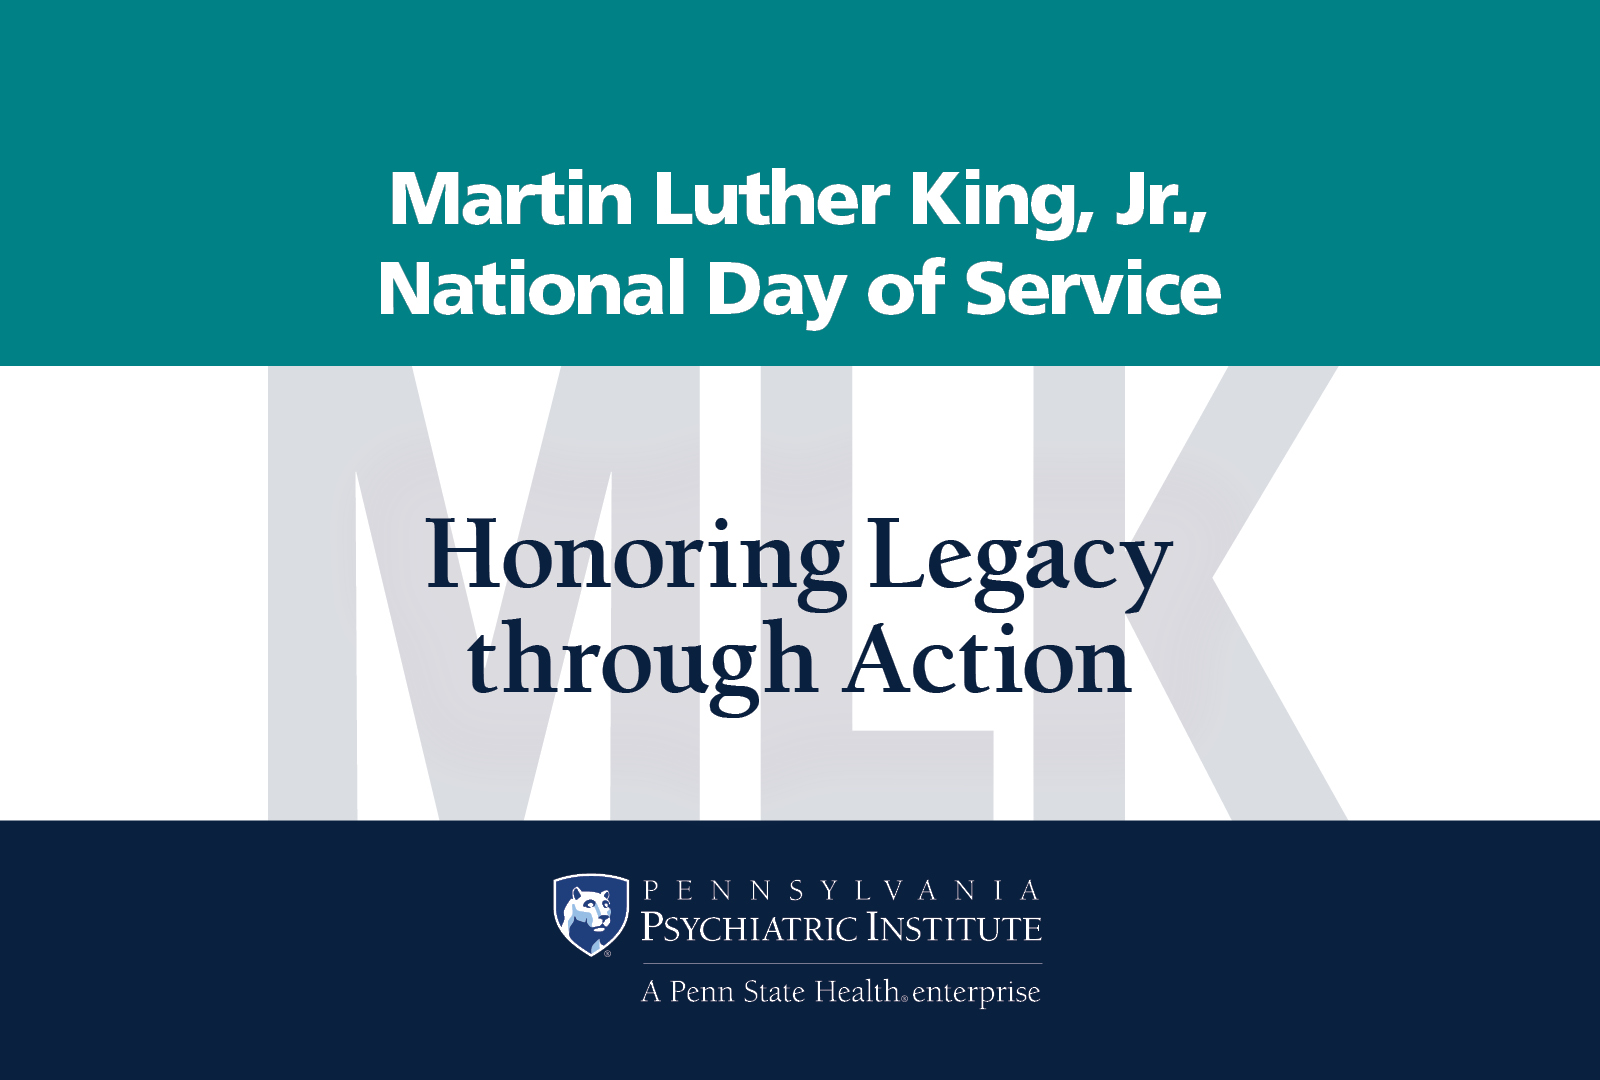 Martin Luther King, Jr., National Day of Service. Honoring Legacy through Action